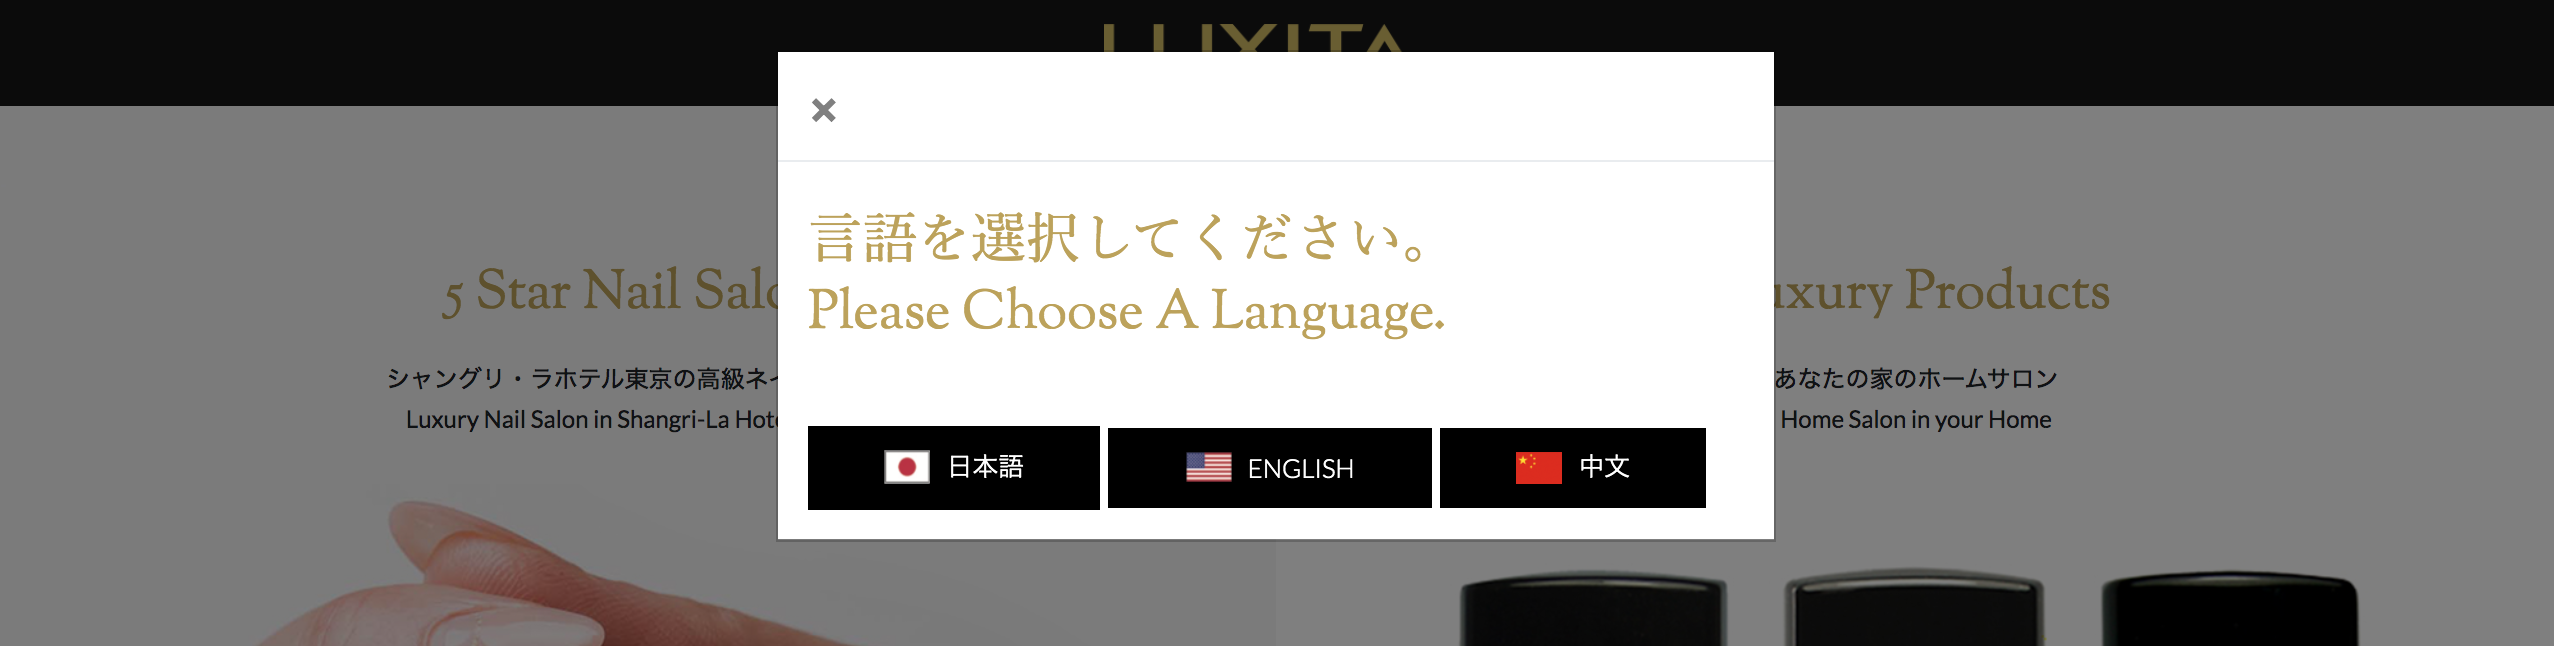 Home page language picker. Choices English, Japanese & Chinese. 言語を選択してください。Please Choose A Language